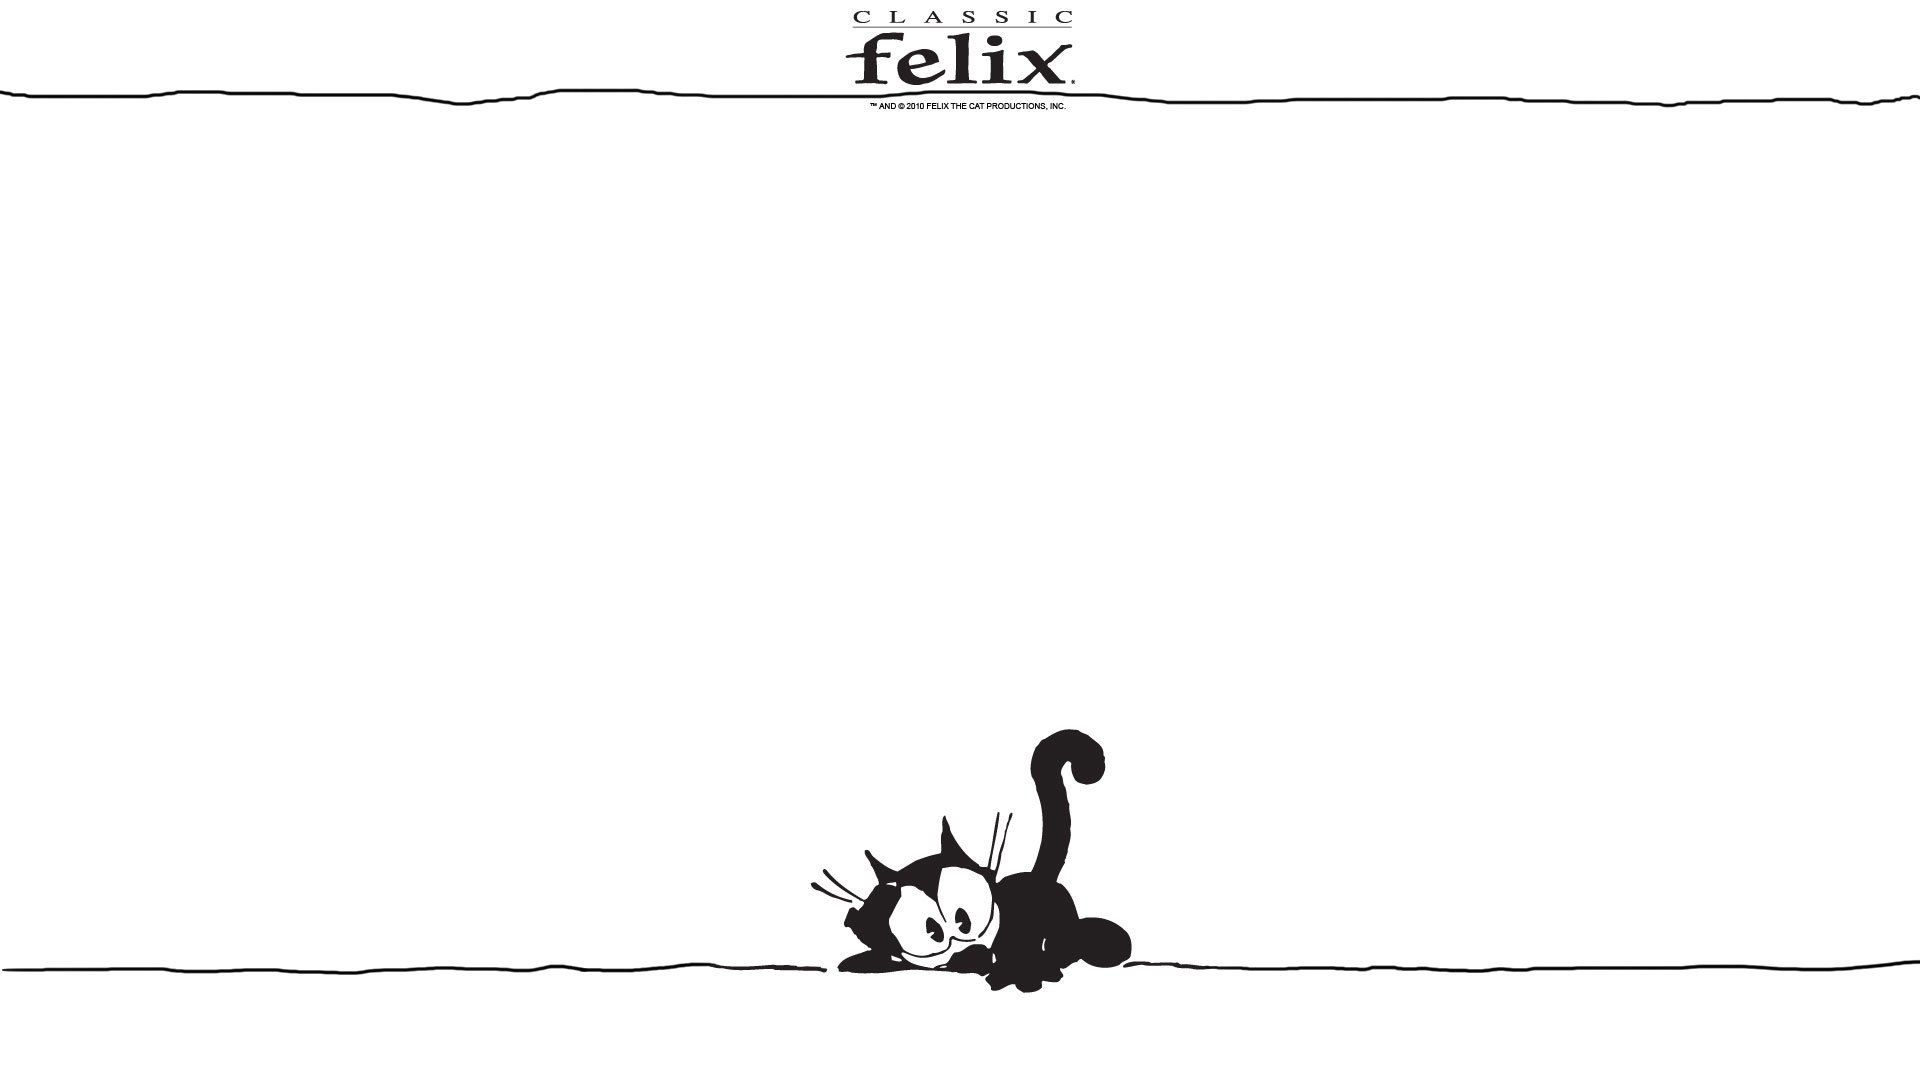 Felix The Cat Wallpapers and Background Images   stmednet